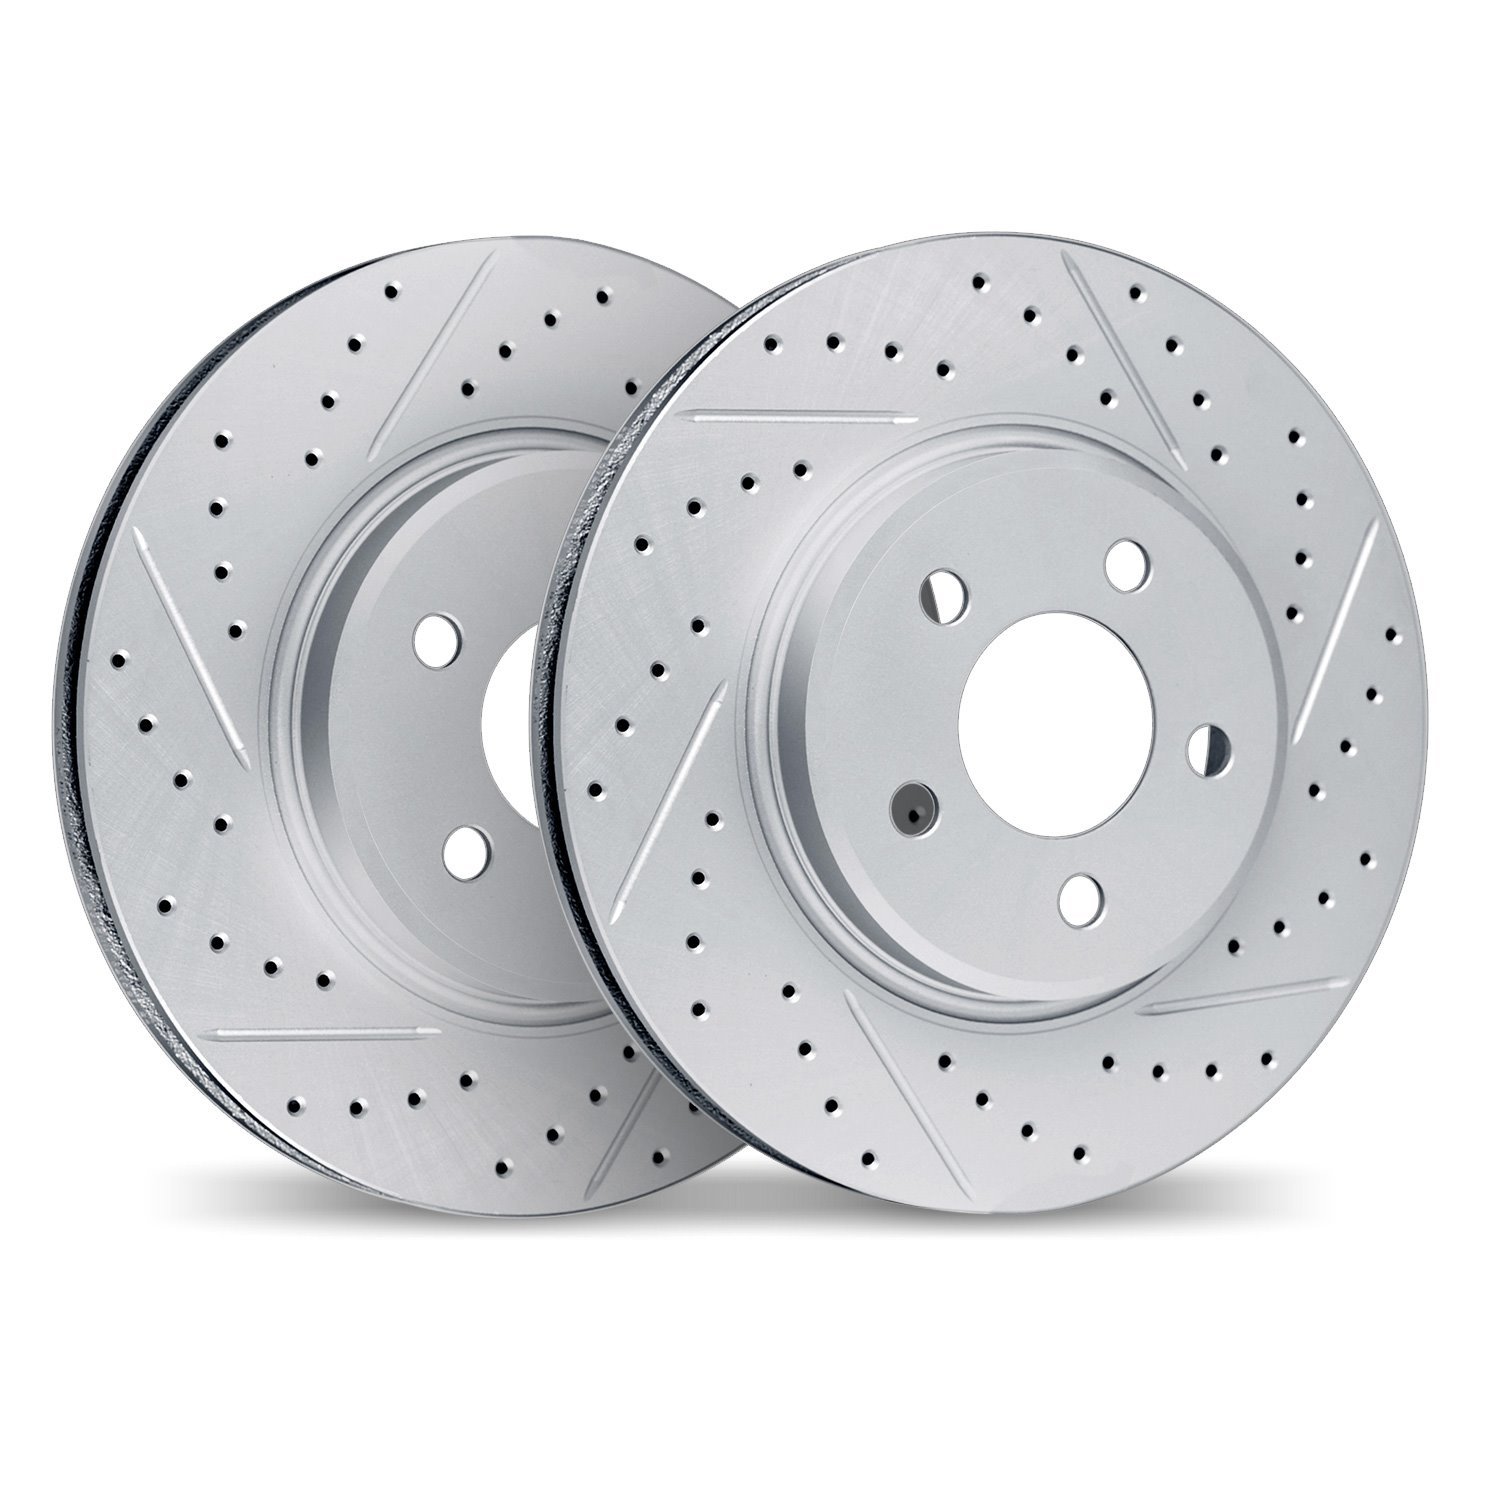 2002-47042 Geoperformance Drilled/Slotted Brake Rotors, 2014-2019 GM, Position: Rear